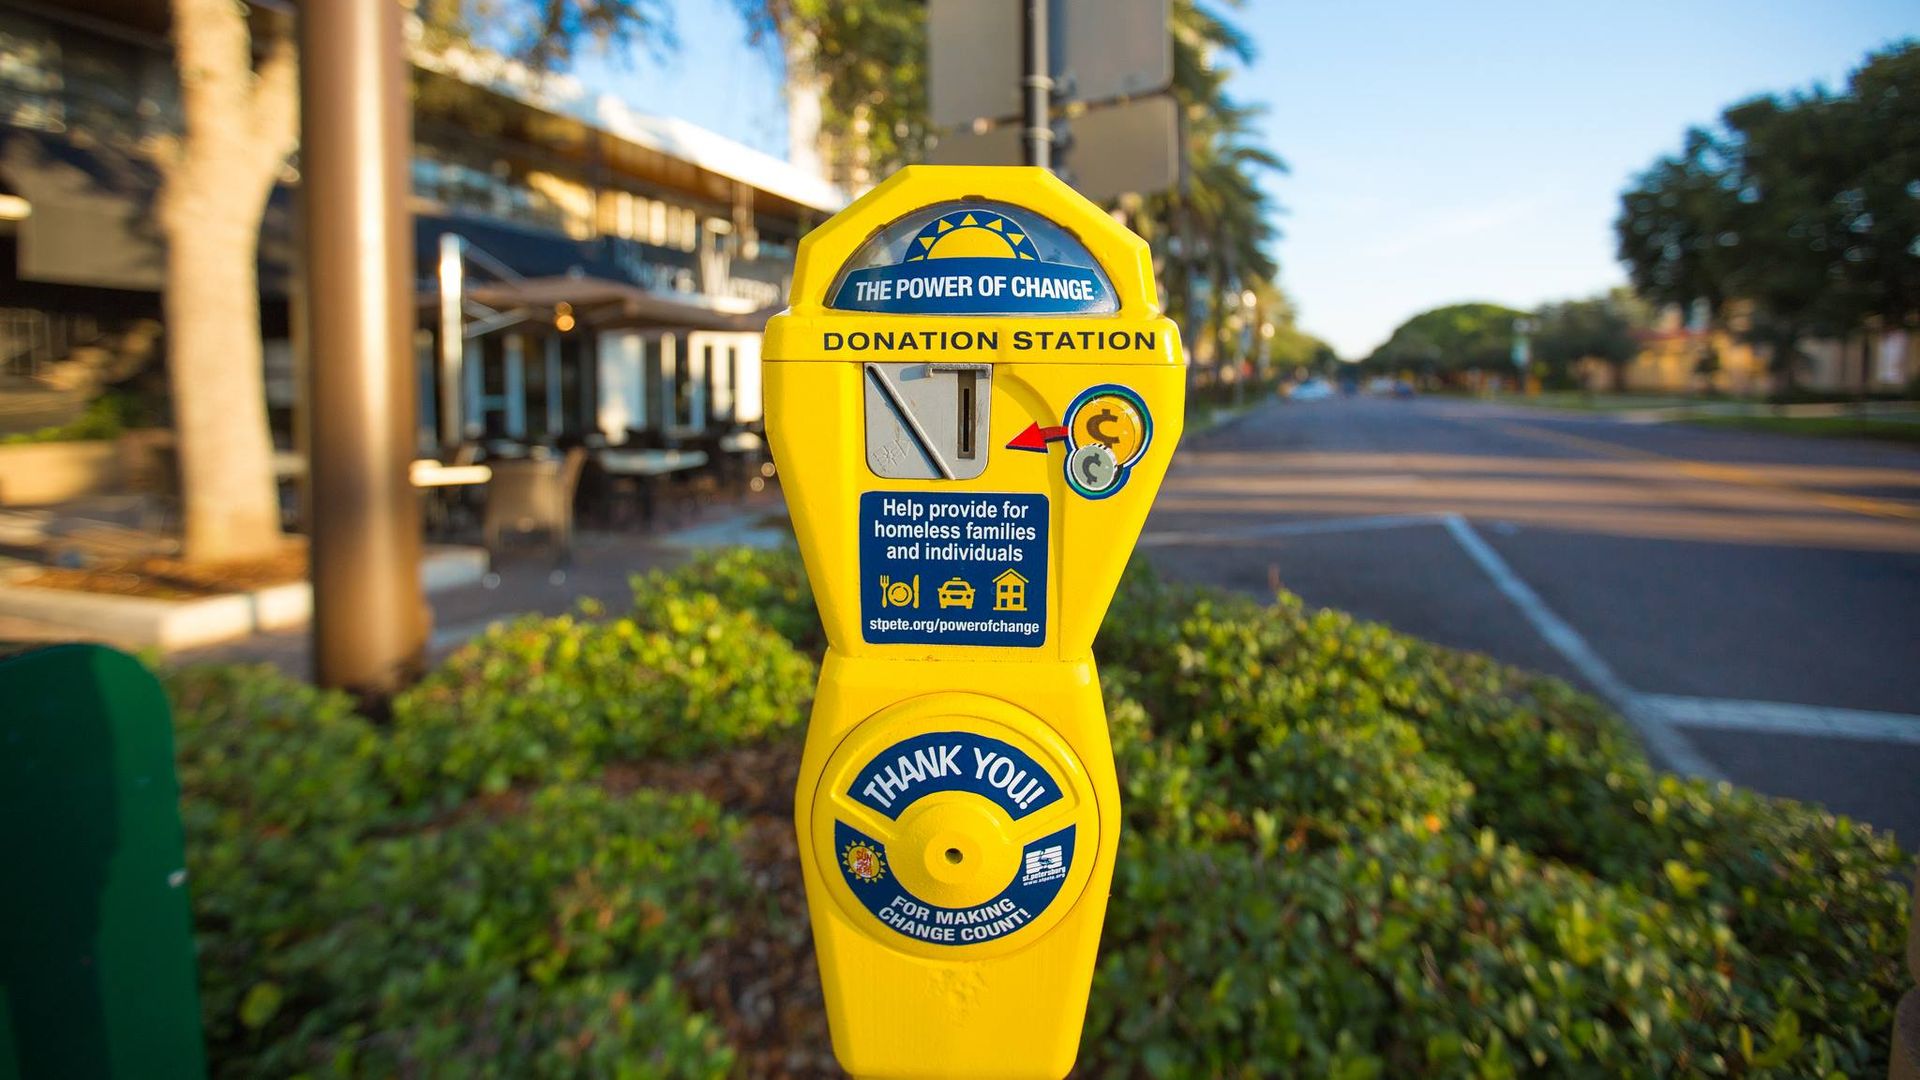 yellow parking meter that says "donation station"